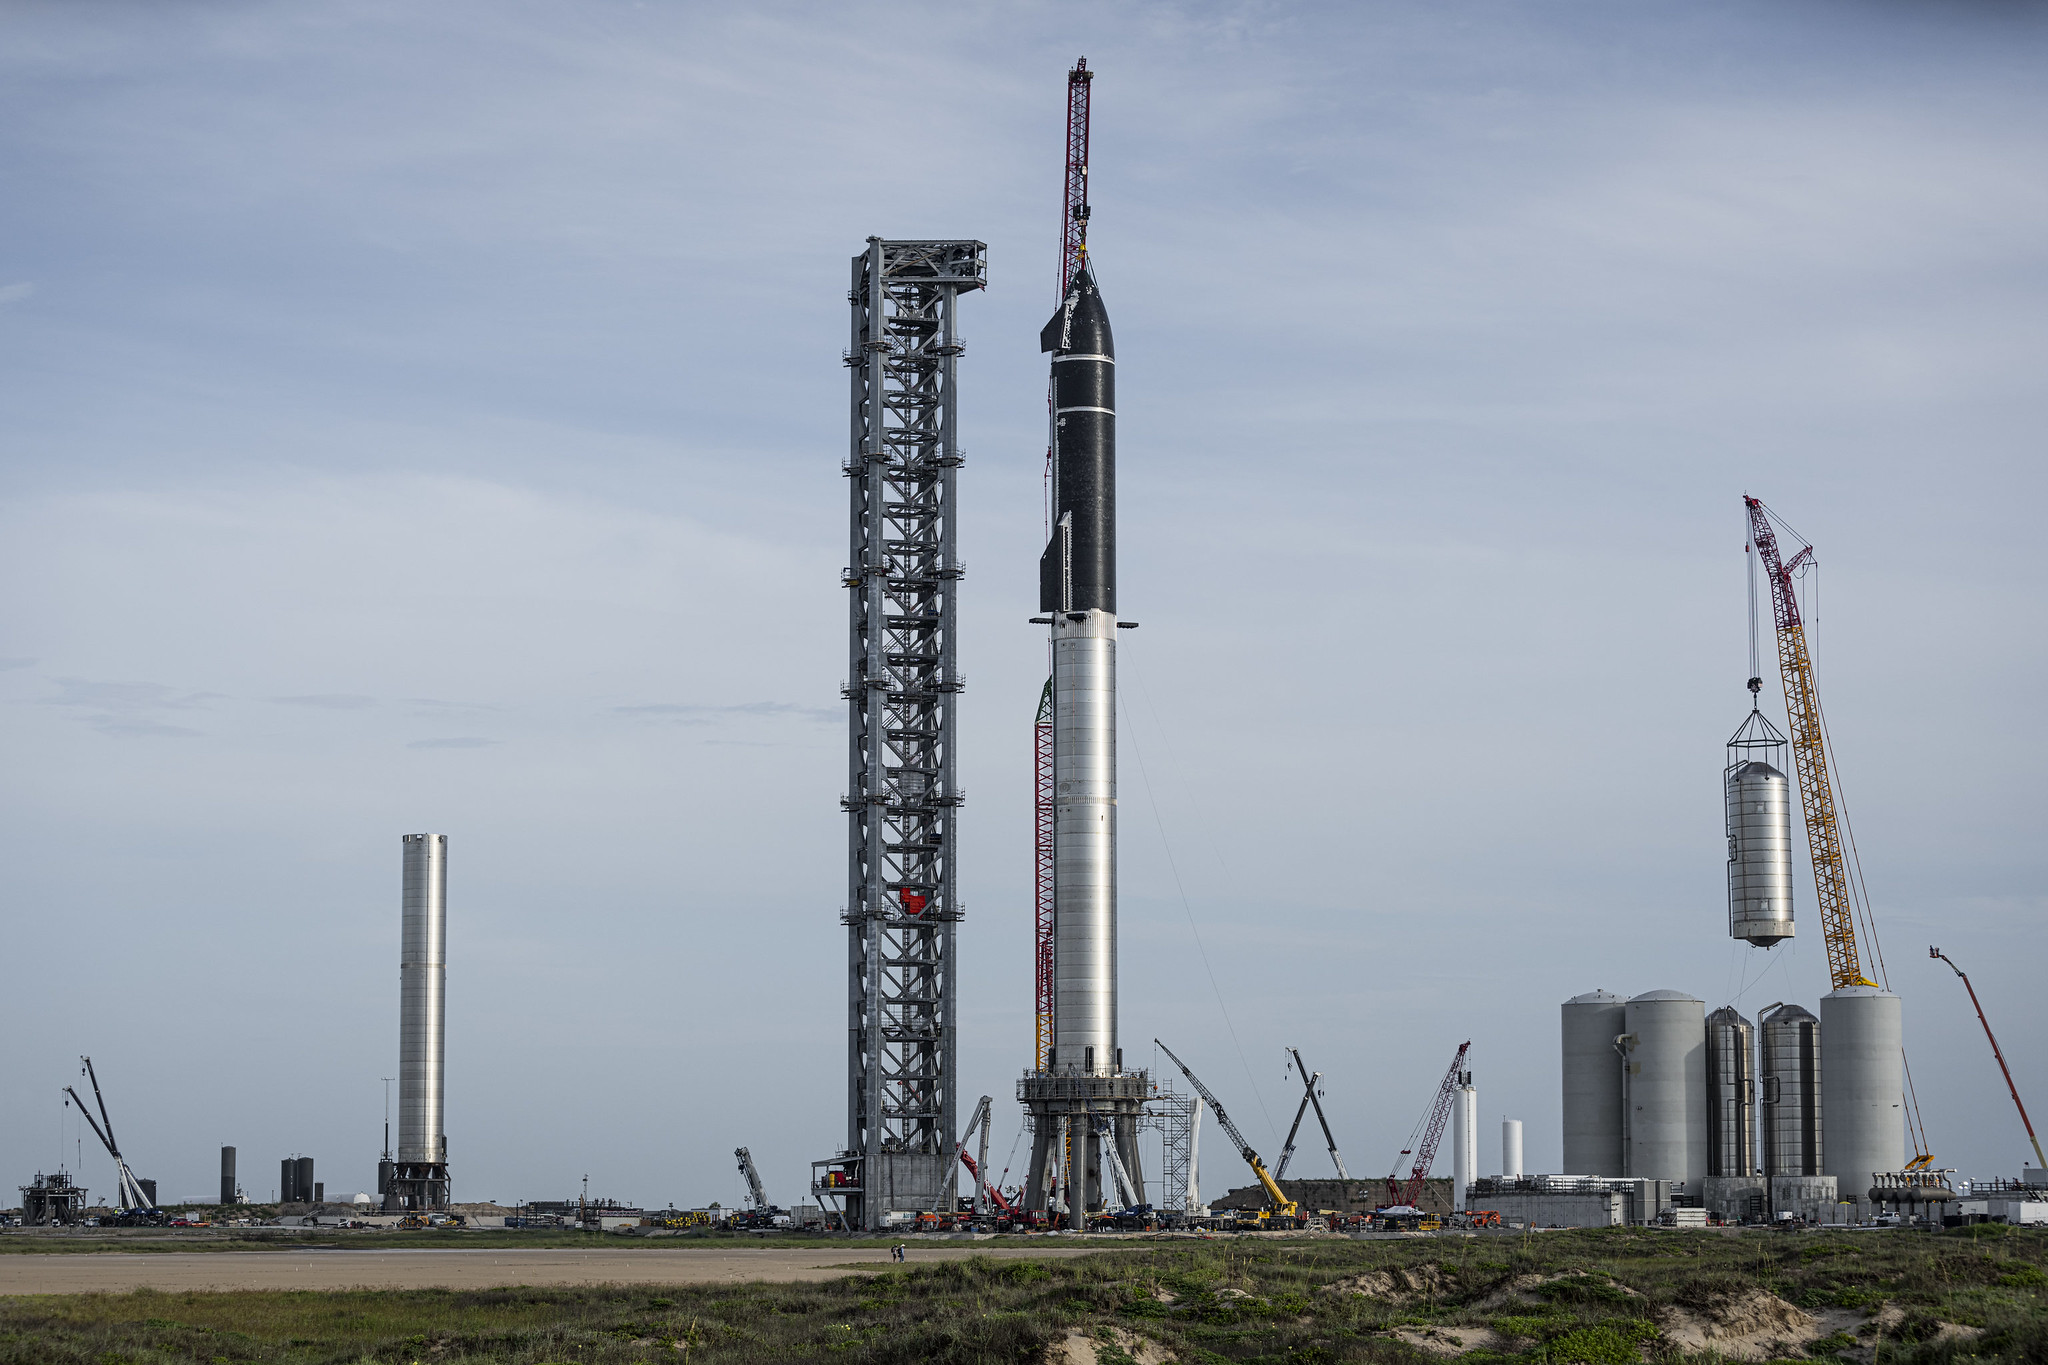 Starship and Super Heavy Stack. Фото © Flickr / Official SpaceX Photos